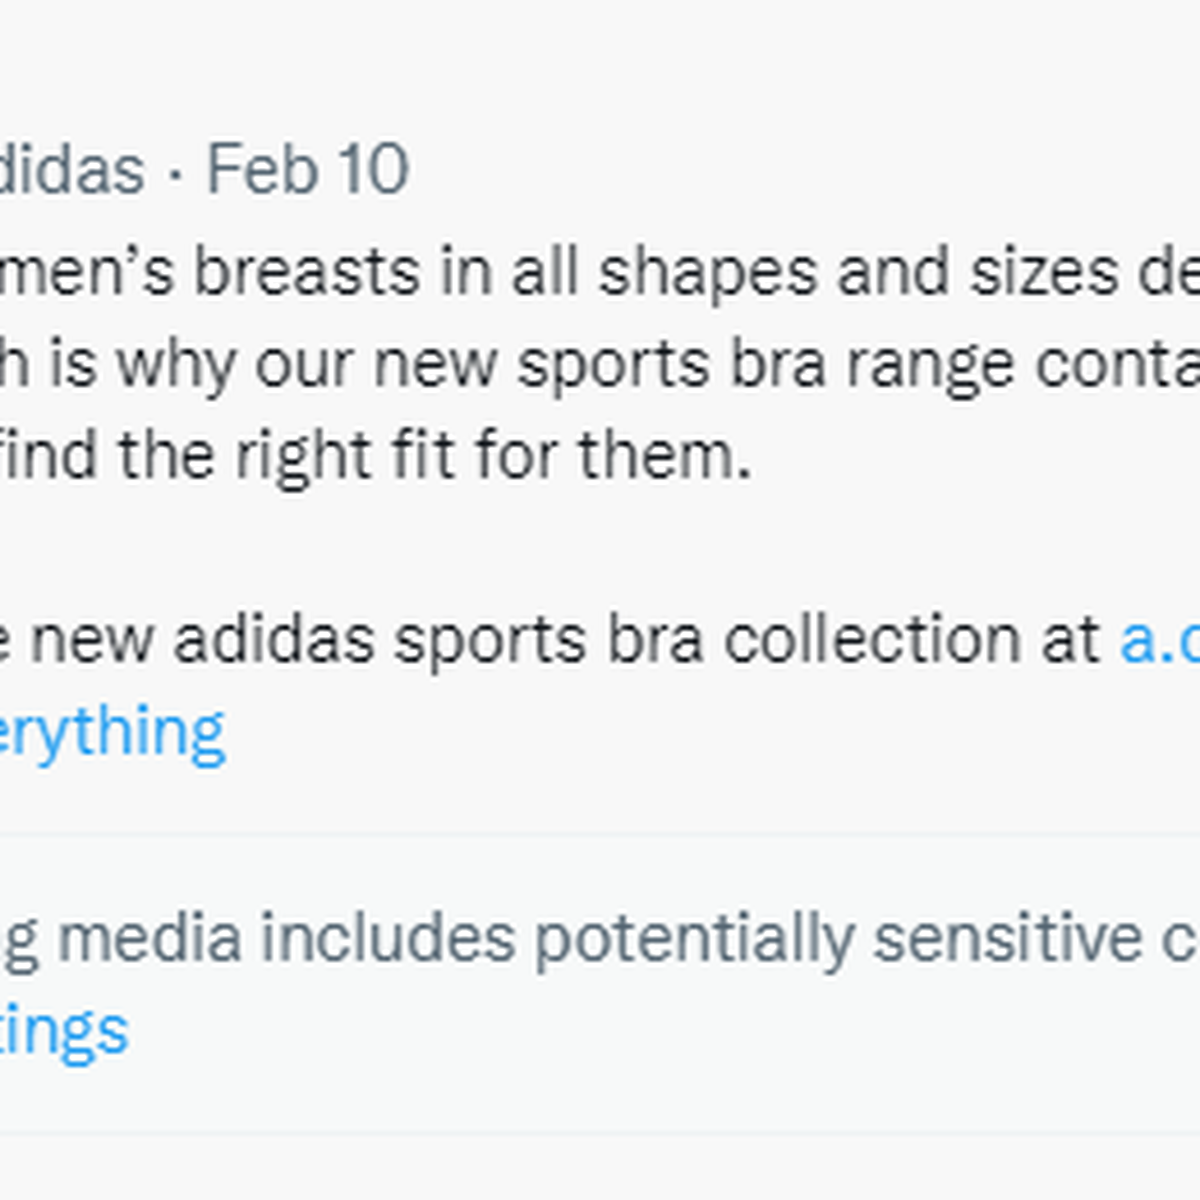 Adidas' new body positive sports bra ad divides internet with its